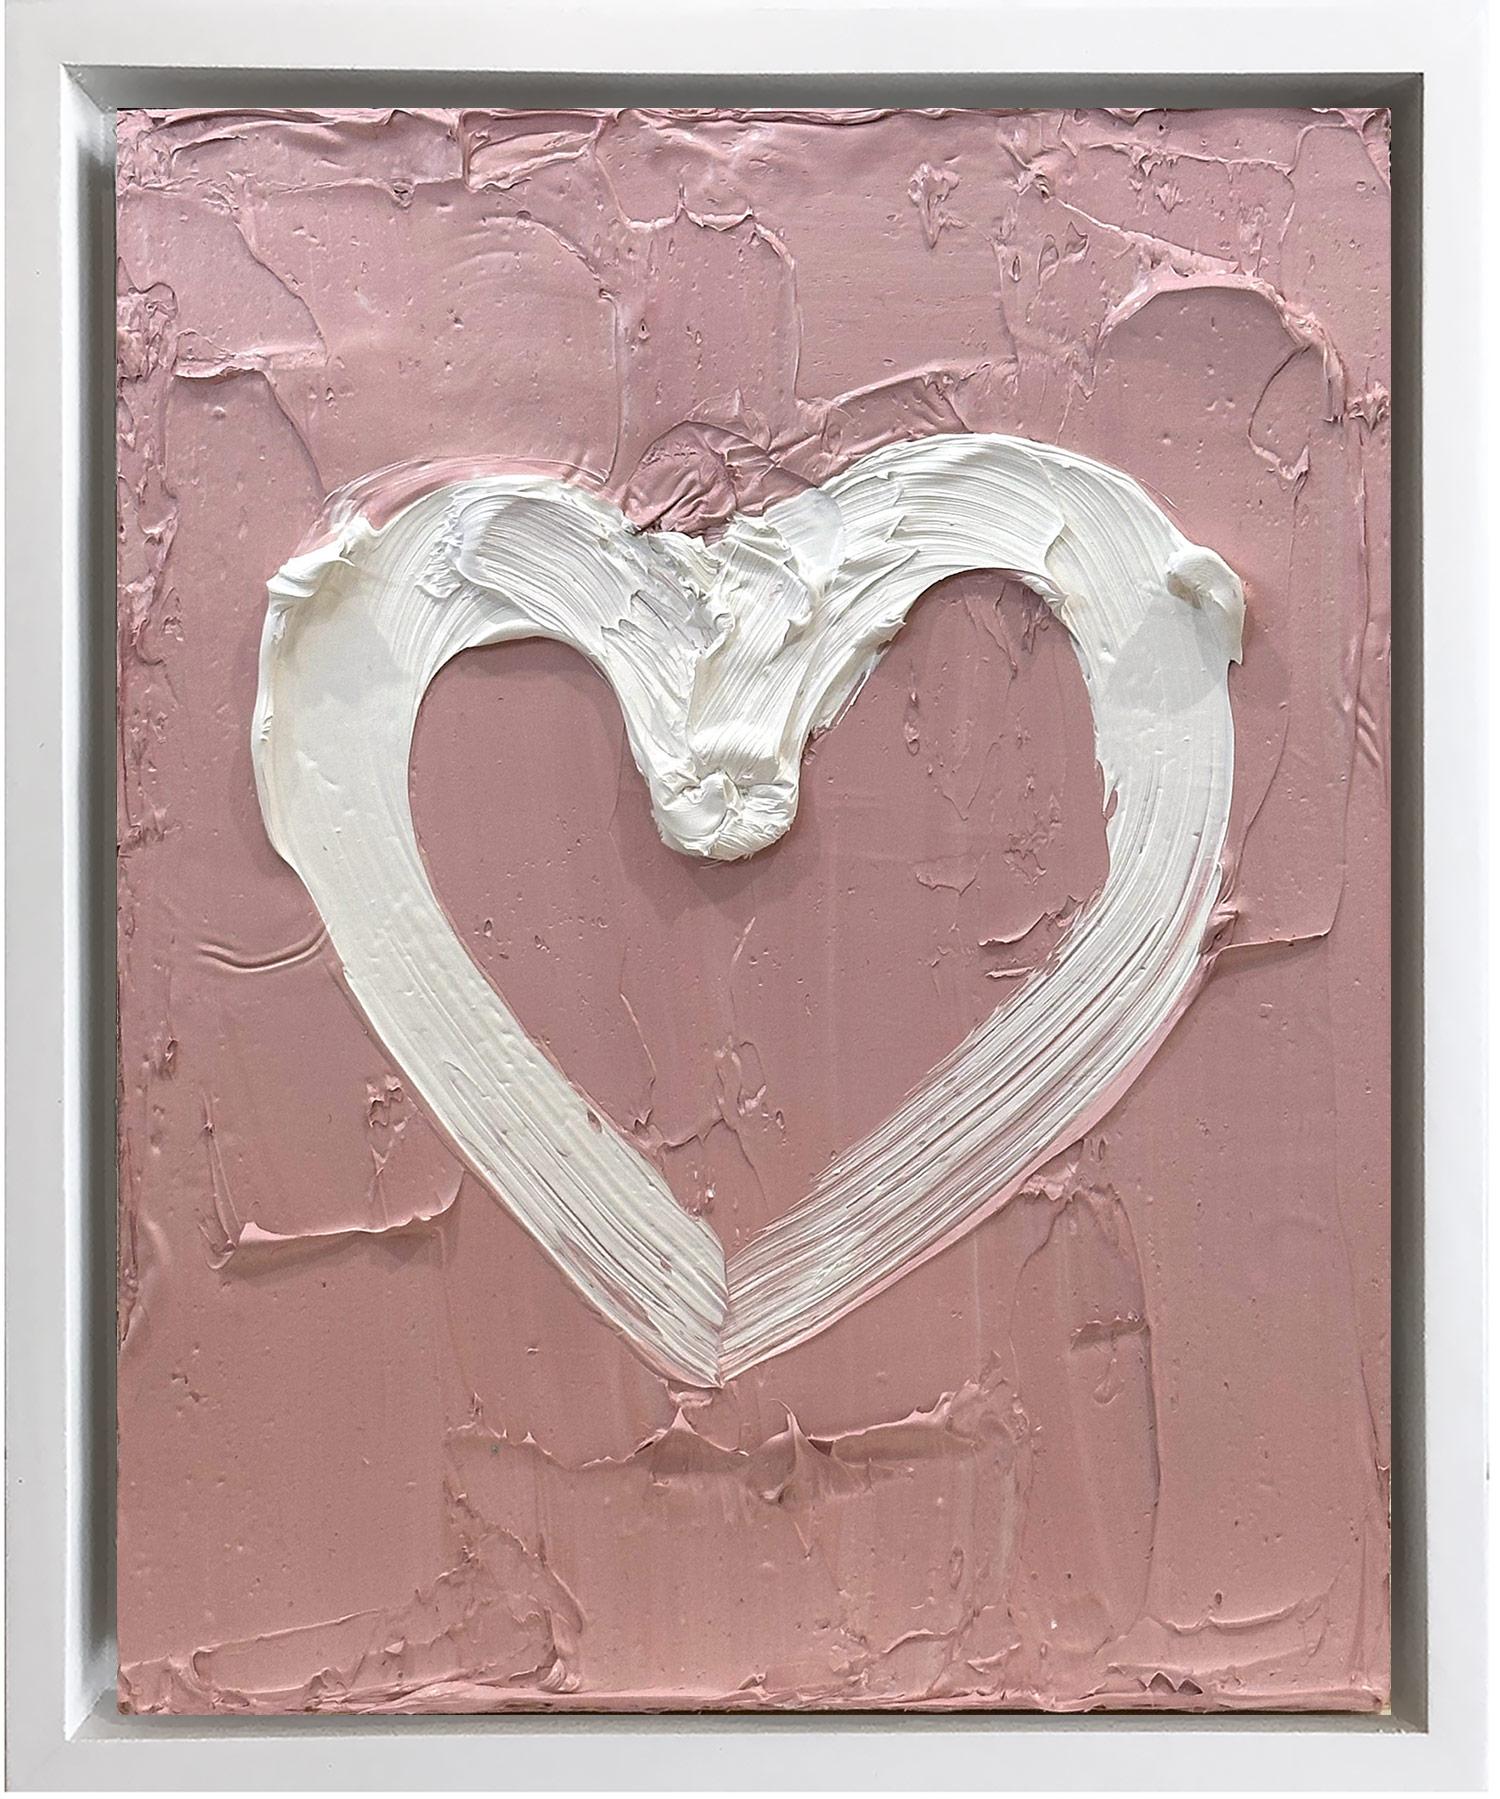 Cindy Shaoul Figurative Painting - "My Dusty Rose Heart" Contemporary Pop Art Oil Painting with Floater Frame